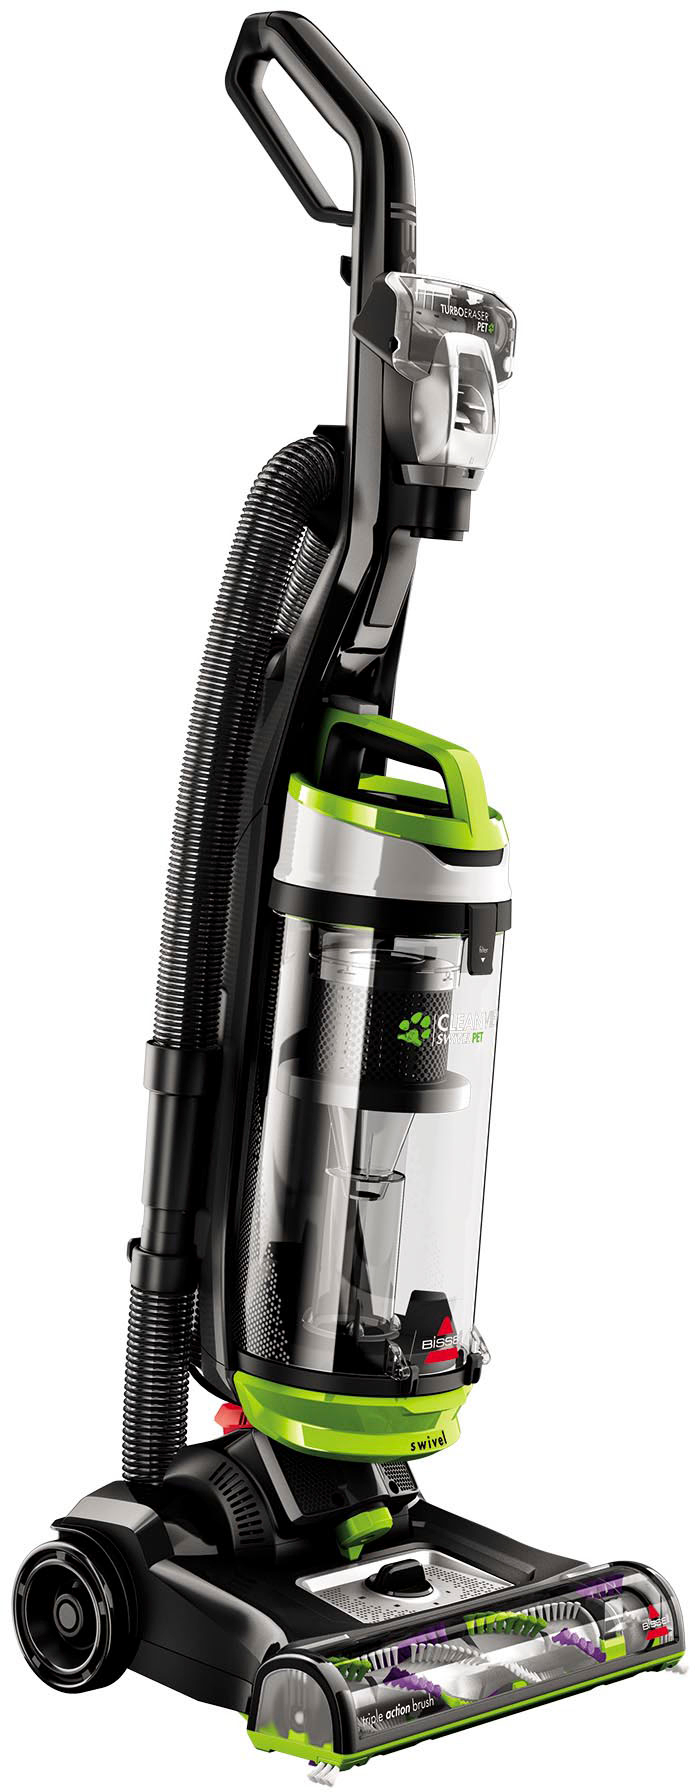 Angle View: BISSELL - CleanView Swivel Pet Vacuum Cleaner - Sparkle Silver/Cha Cha Lime with black accents